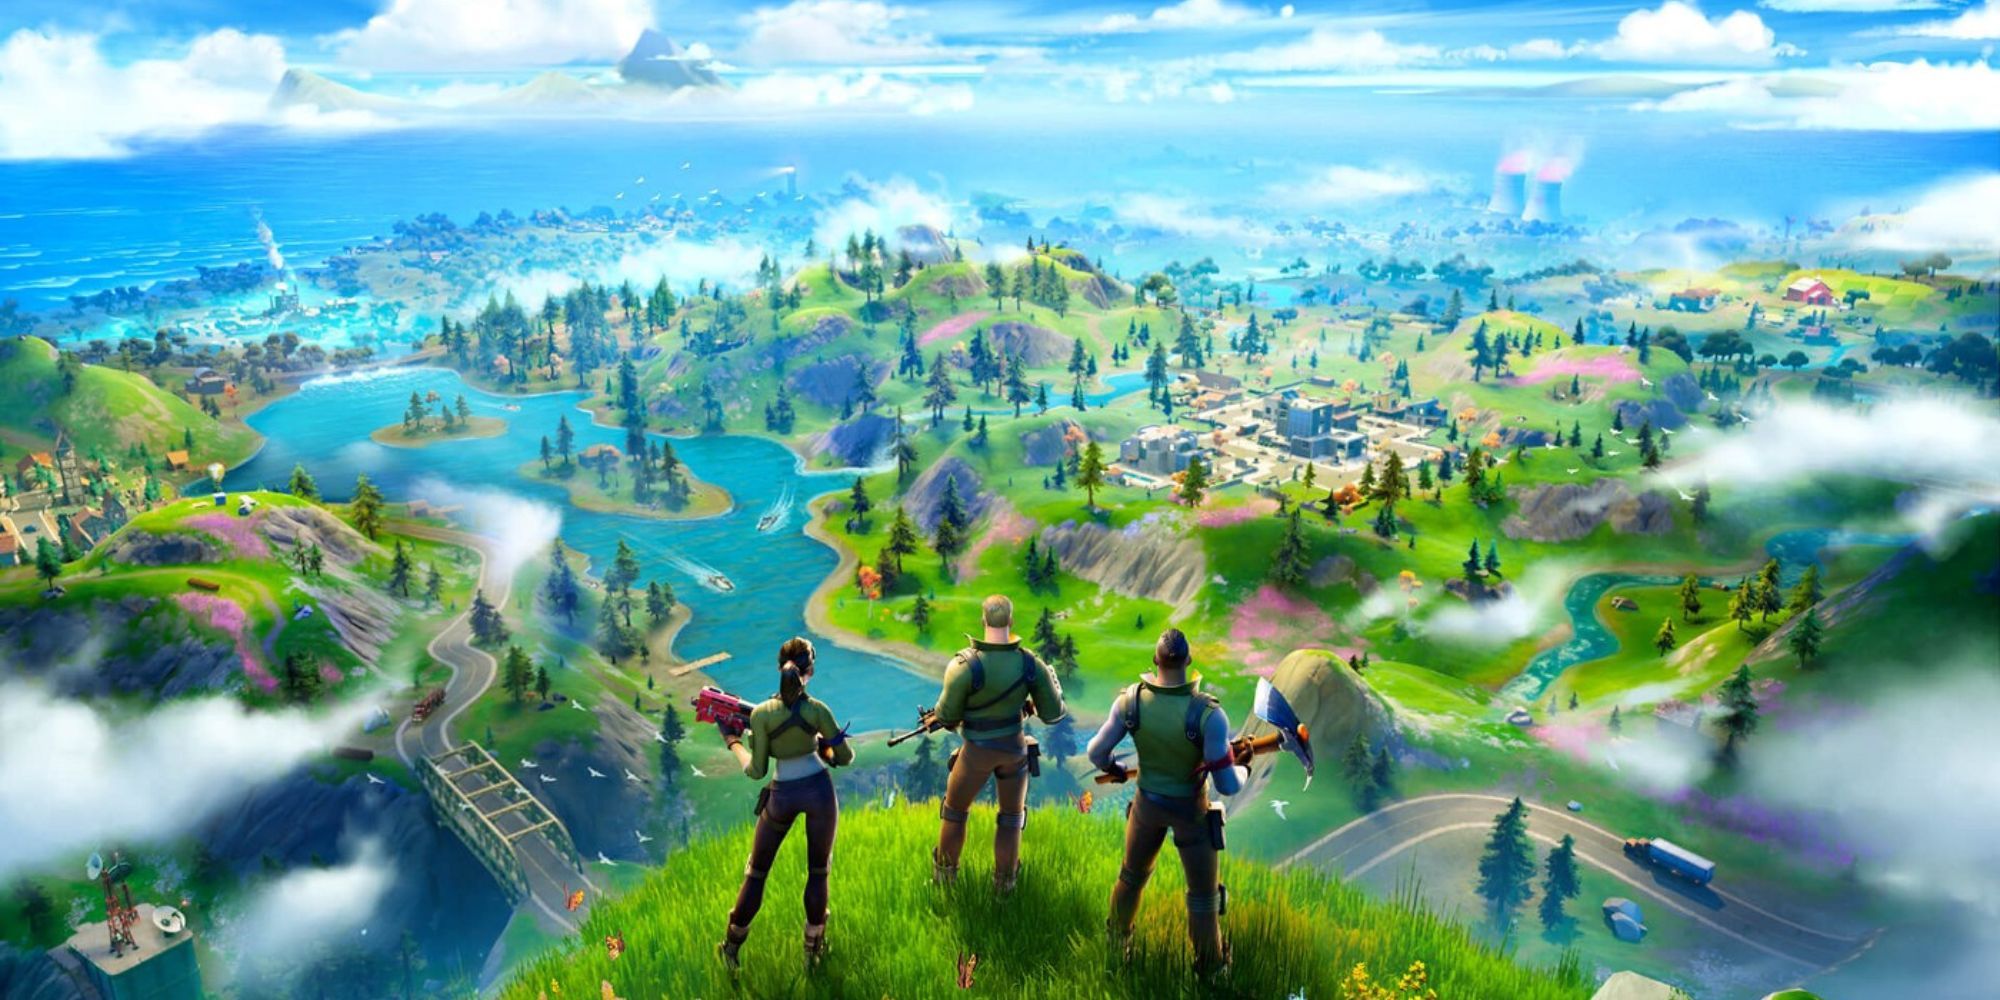 Three characters stand on a cliff overlooking the Fortnite map